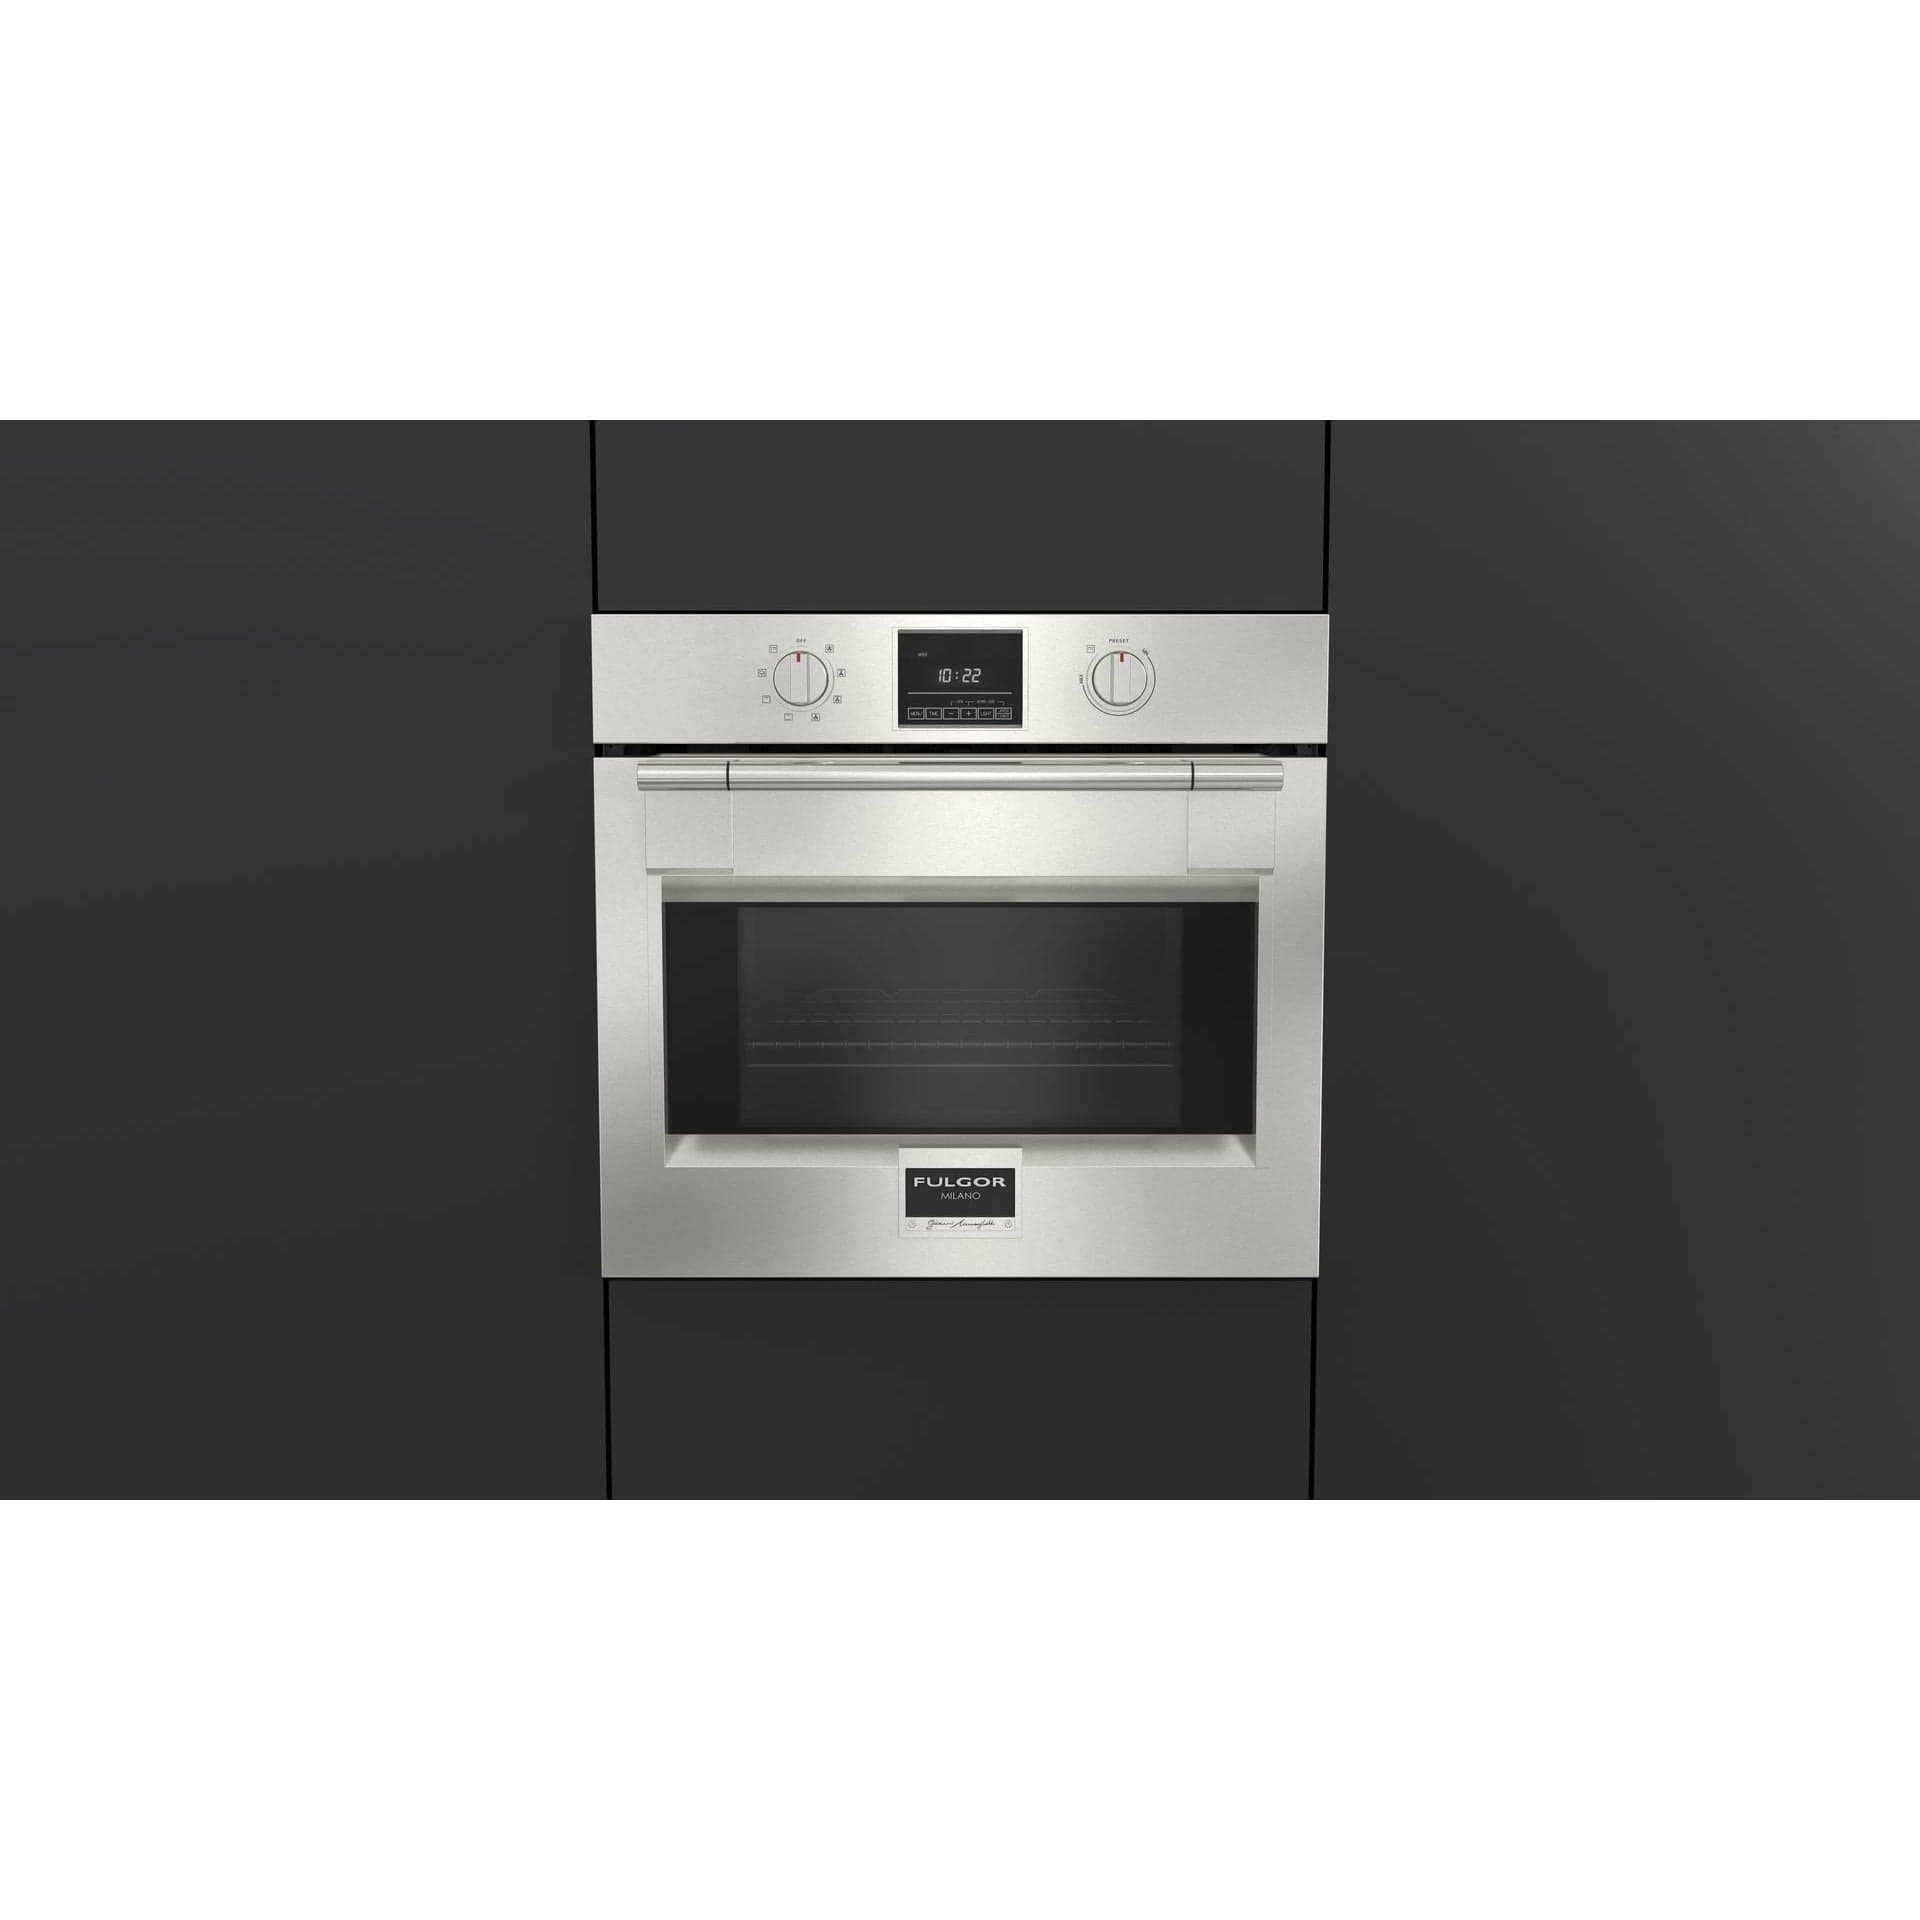 Fulgor Milano 30" Single Electric Wall Oven with 4.4 cu. ft. Gross Capacity, Stainless Steel - F6PSP30S1 Wall Oven F6PSP30S1 Luxury Appliances Direct